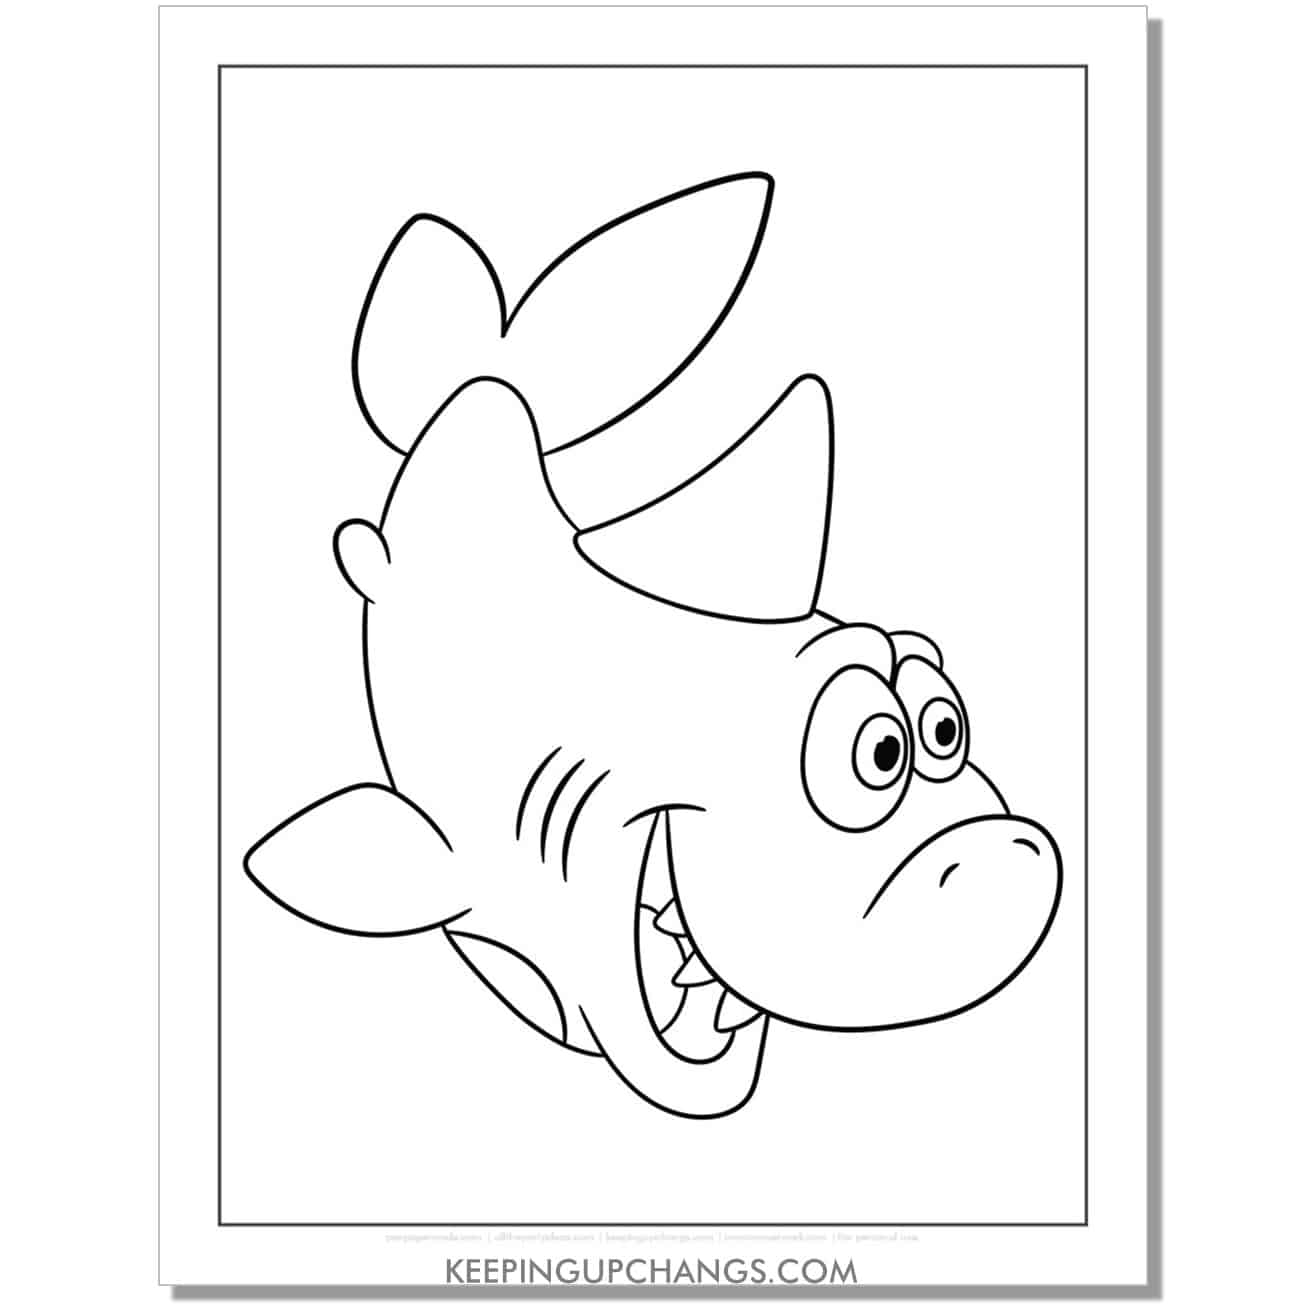 free happy shark with short nose coloring page, sheet.